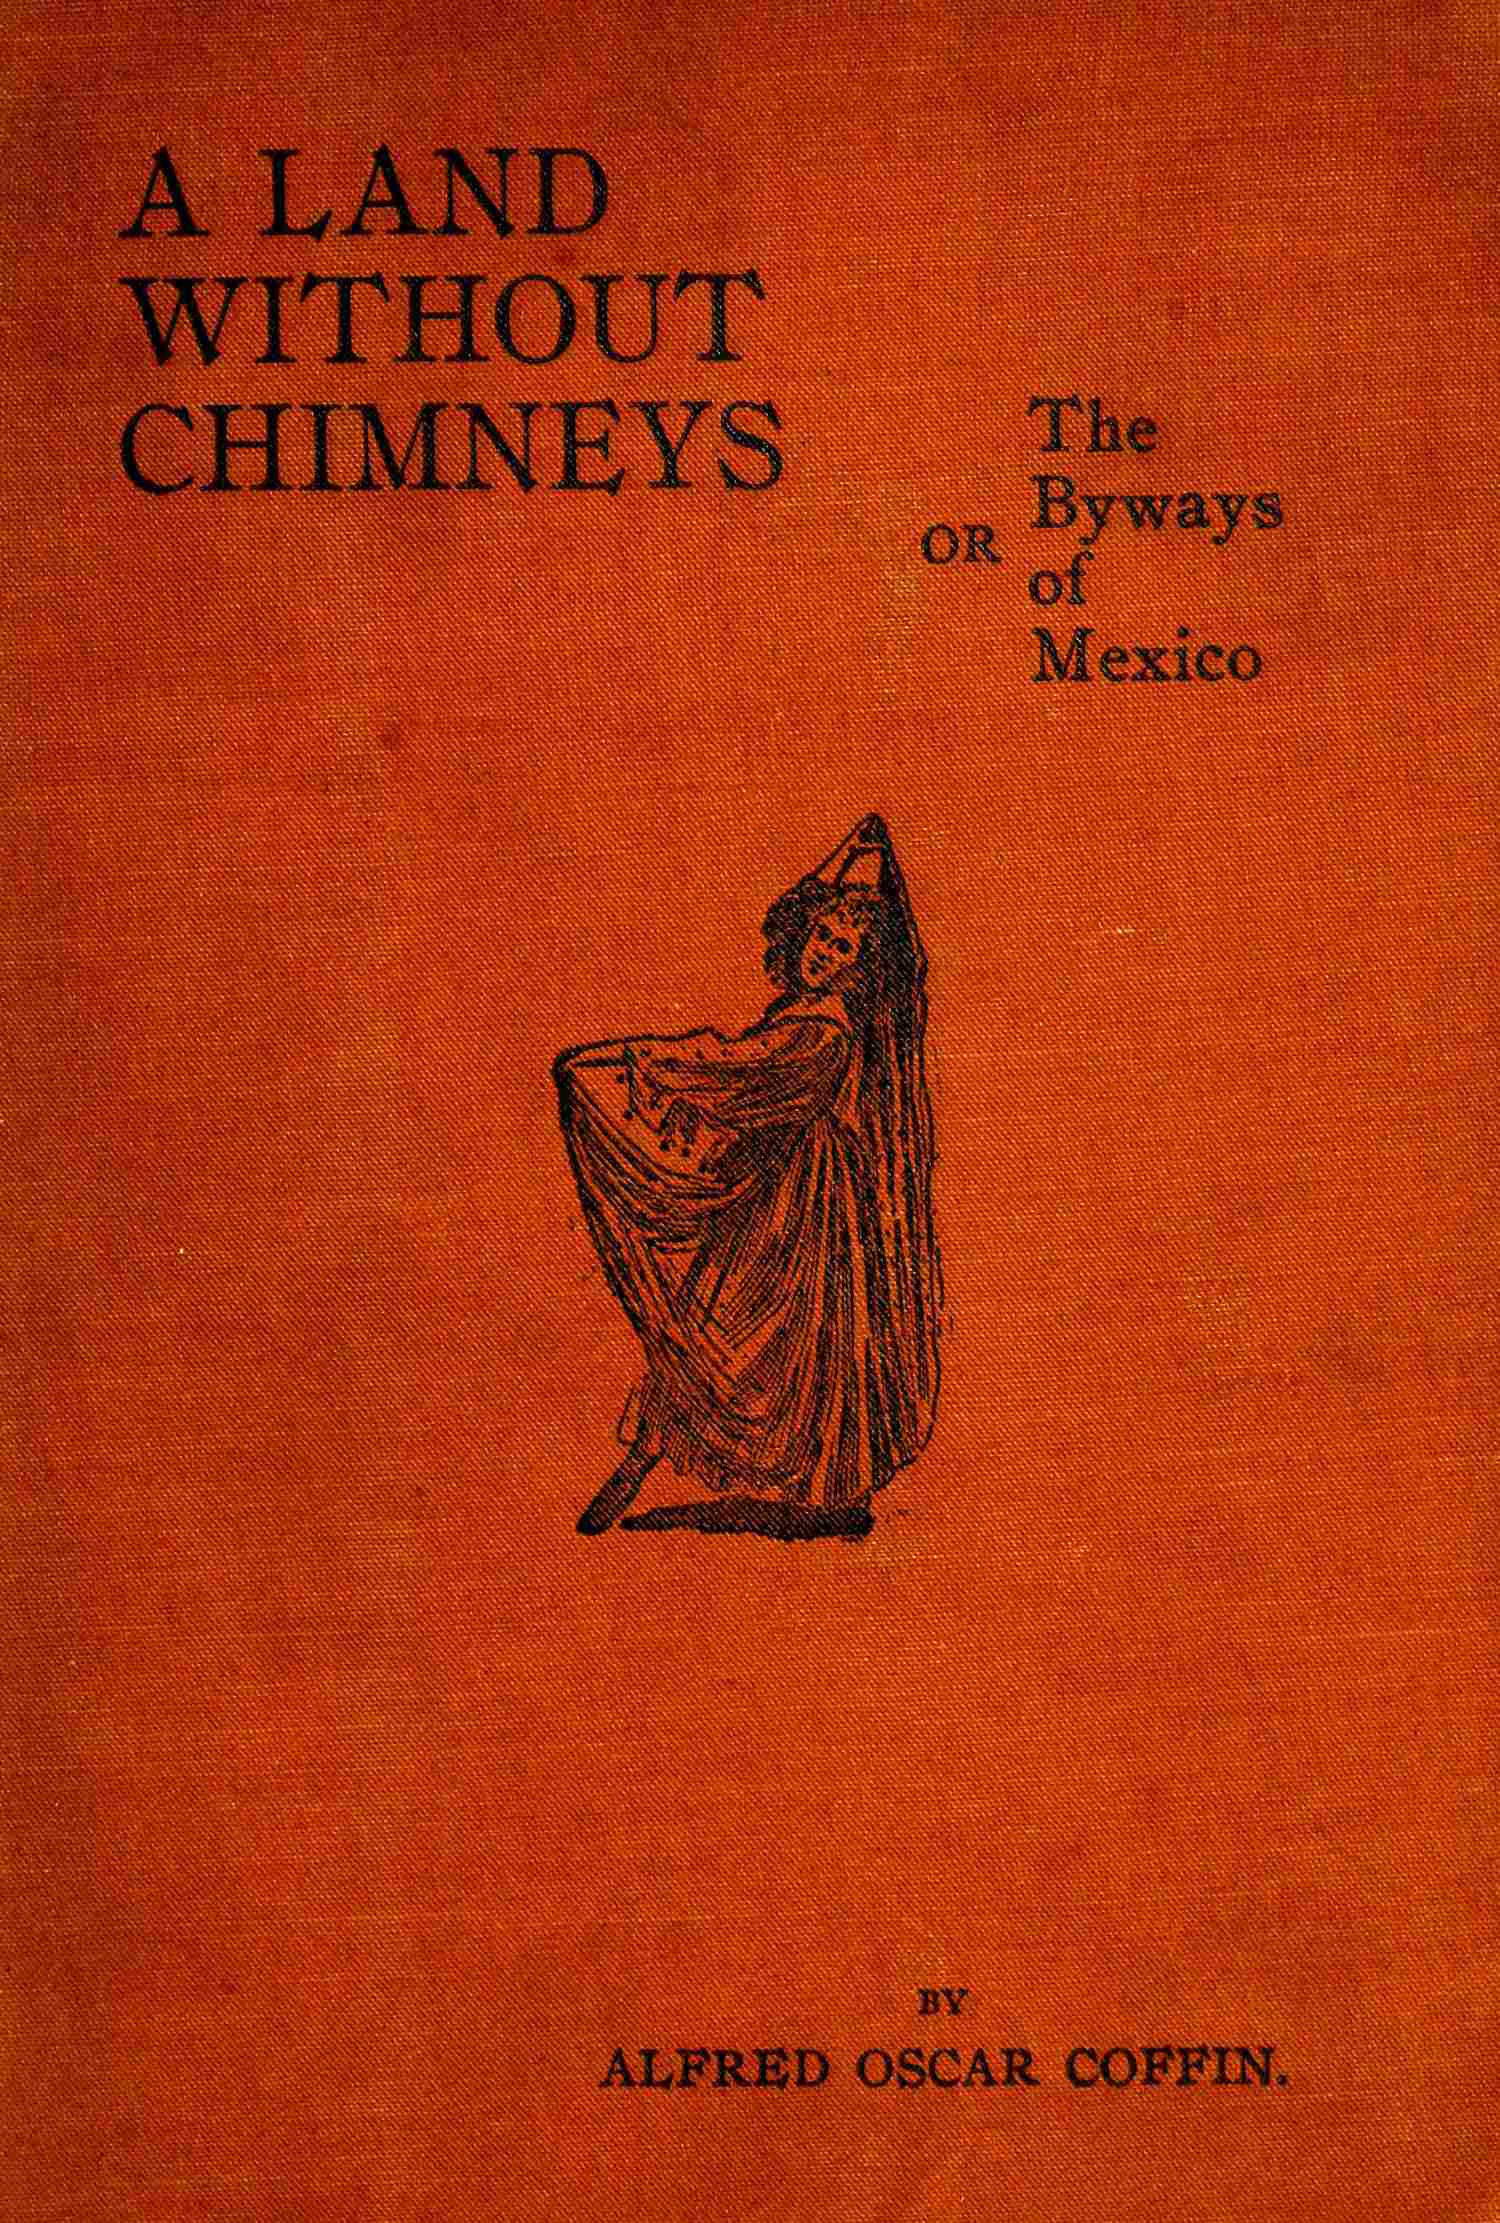 The Project Gutenberg eBook of Land without chimneys, by Alfred